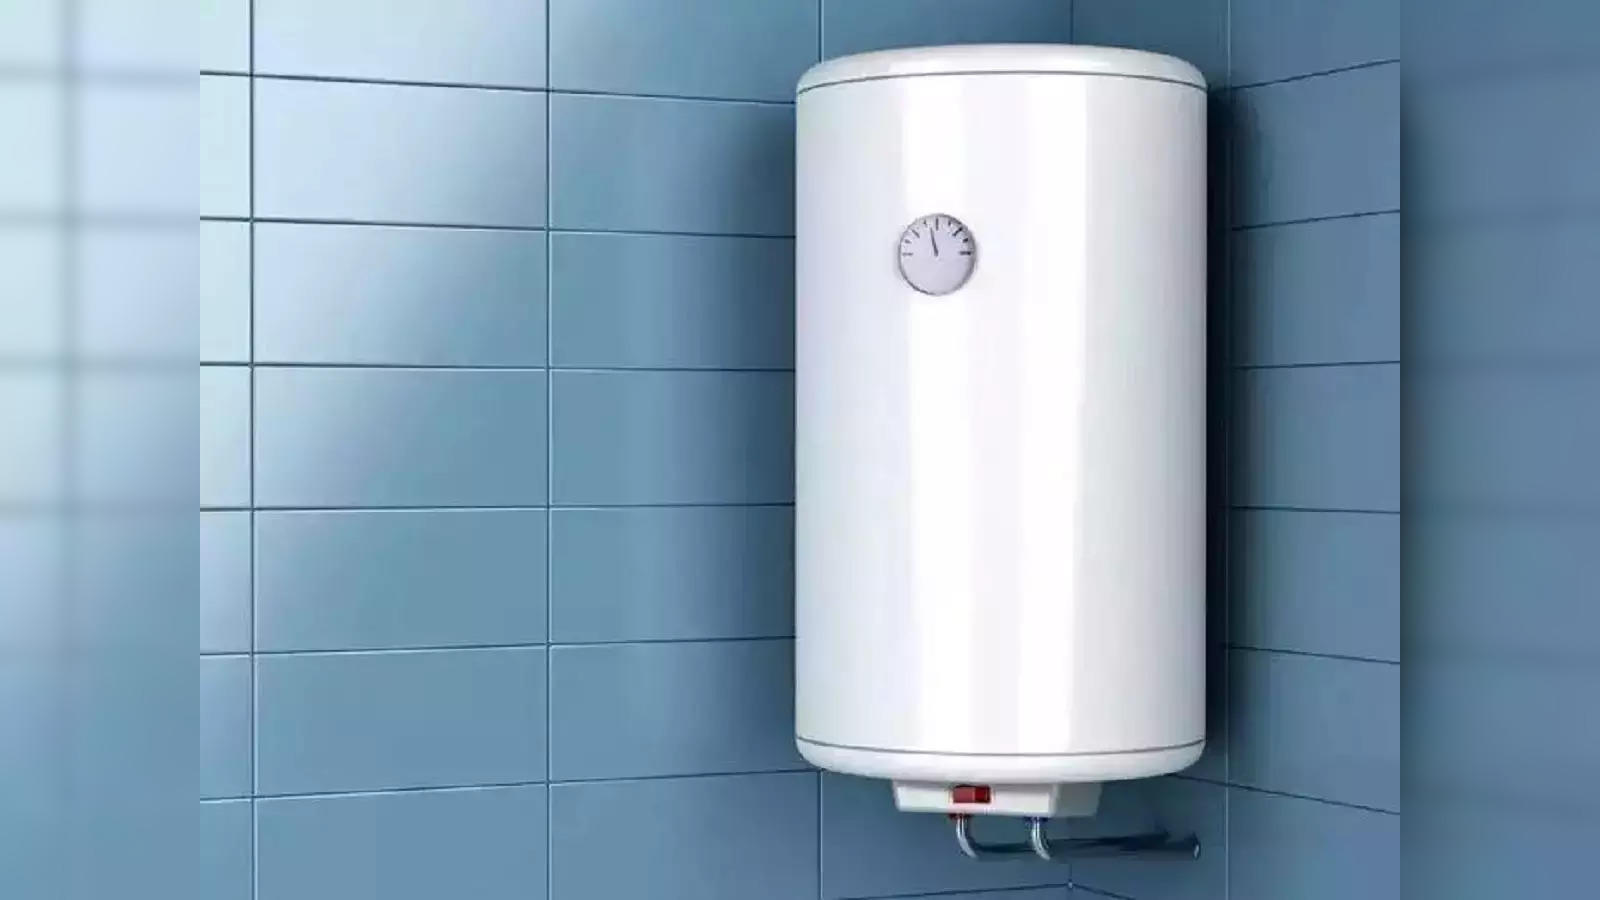 australia renewable energy: Using electric water heaters to store